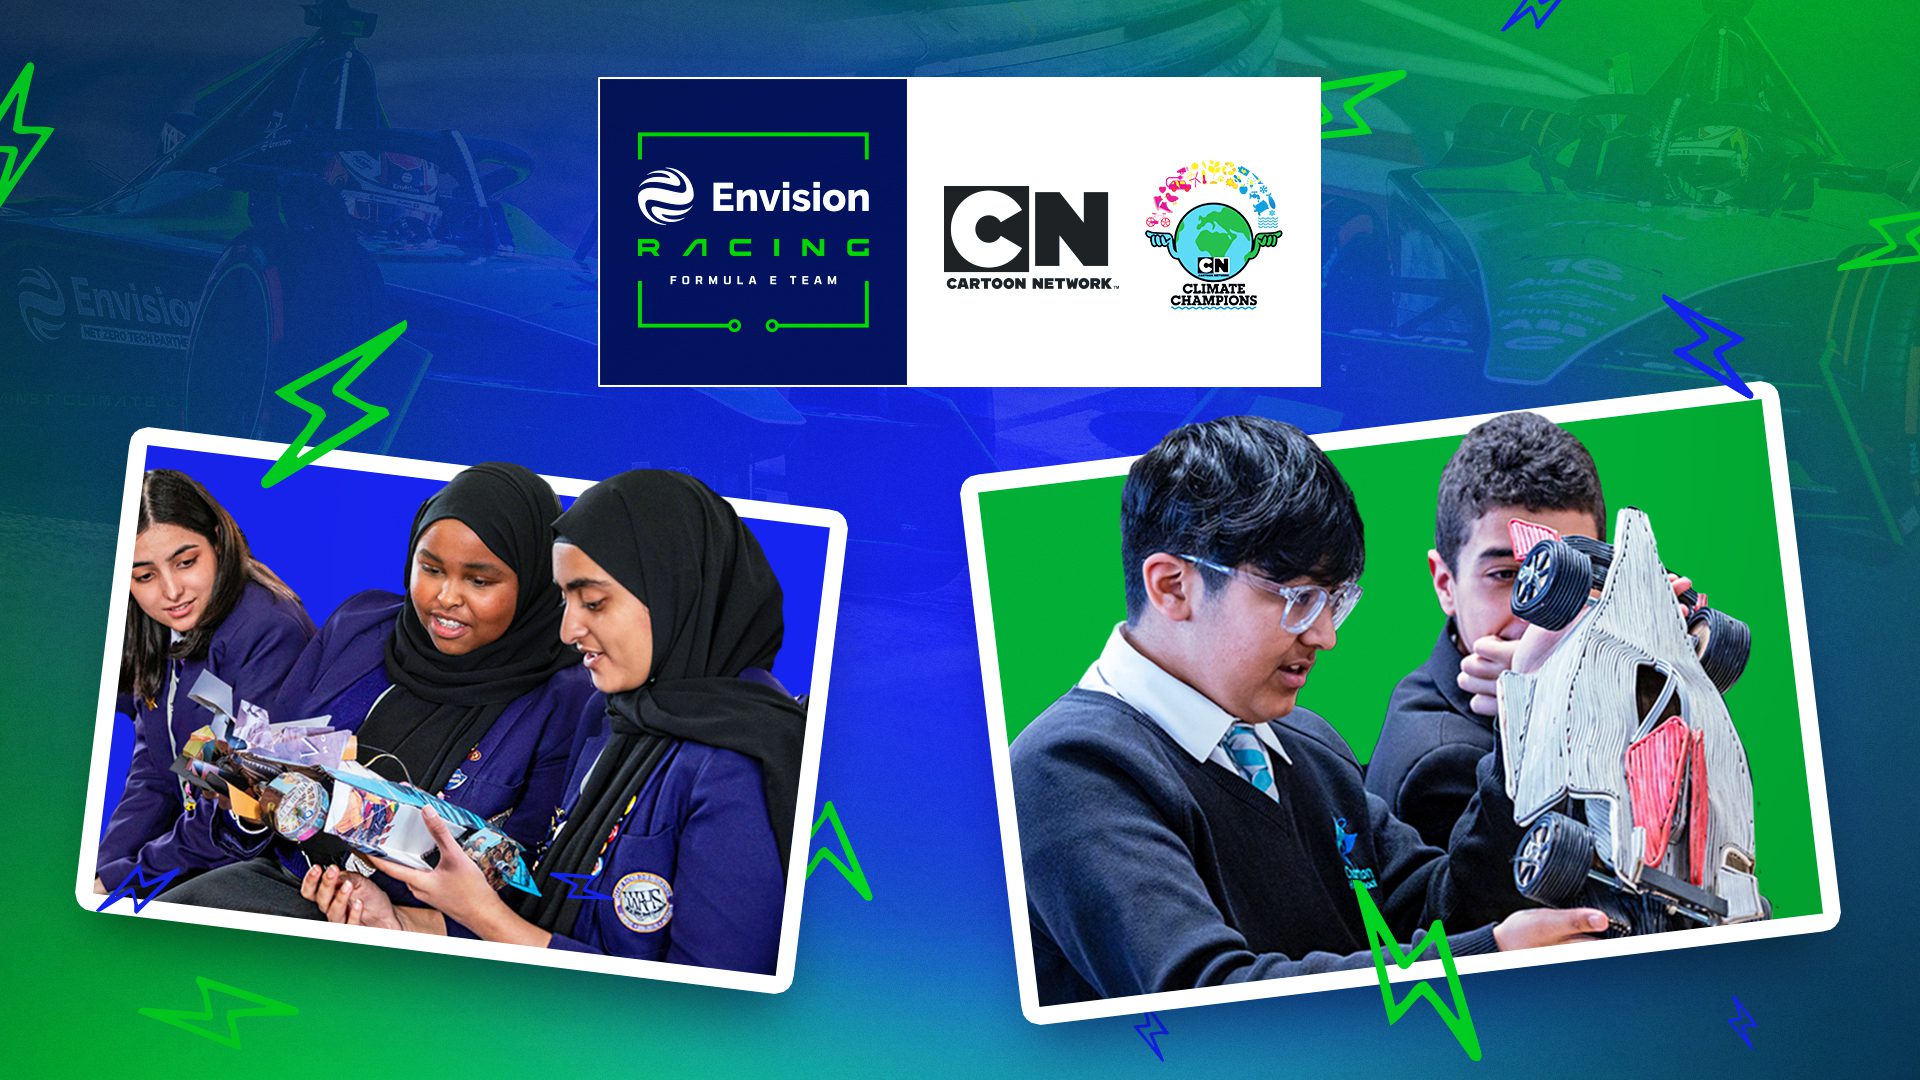 Envision Racing Climate Champions Image